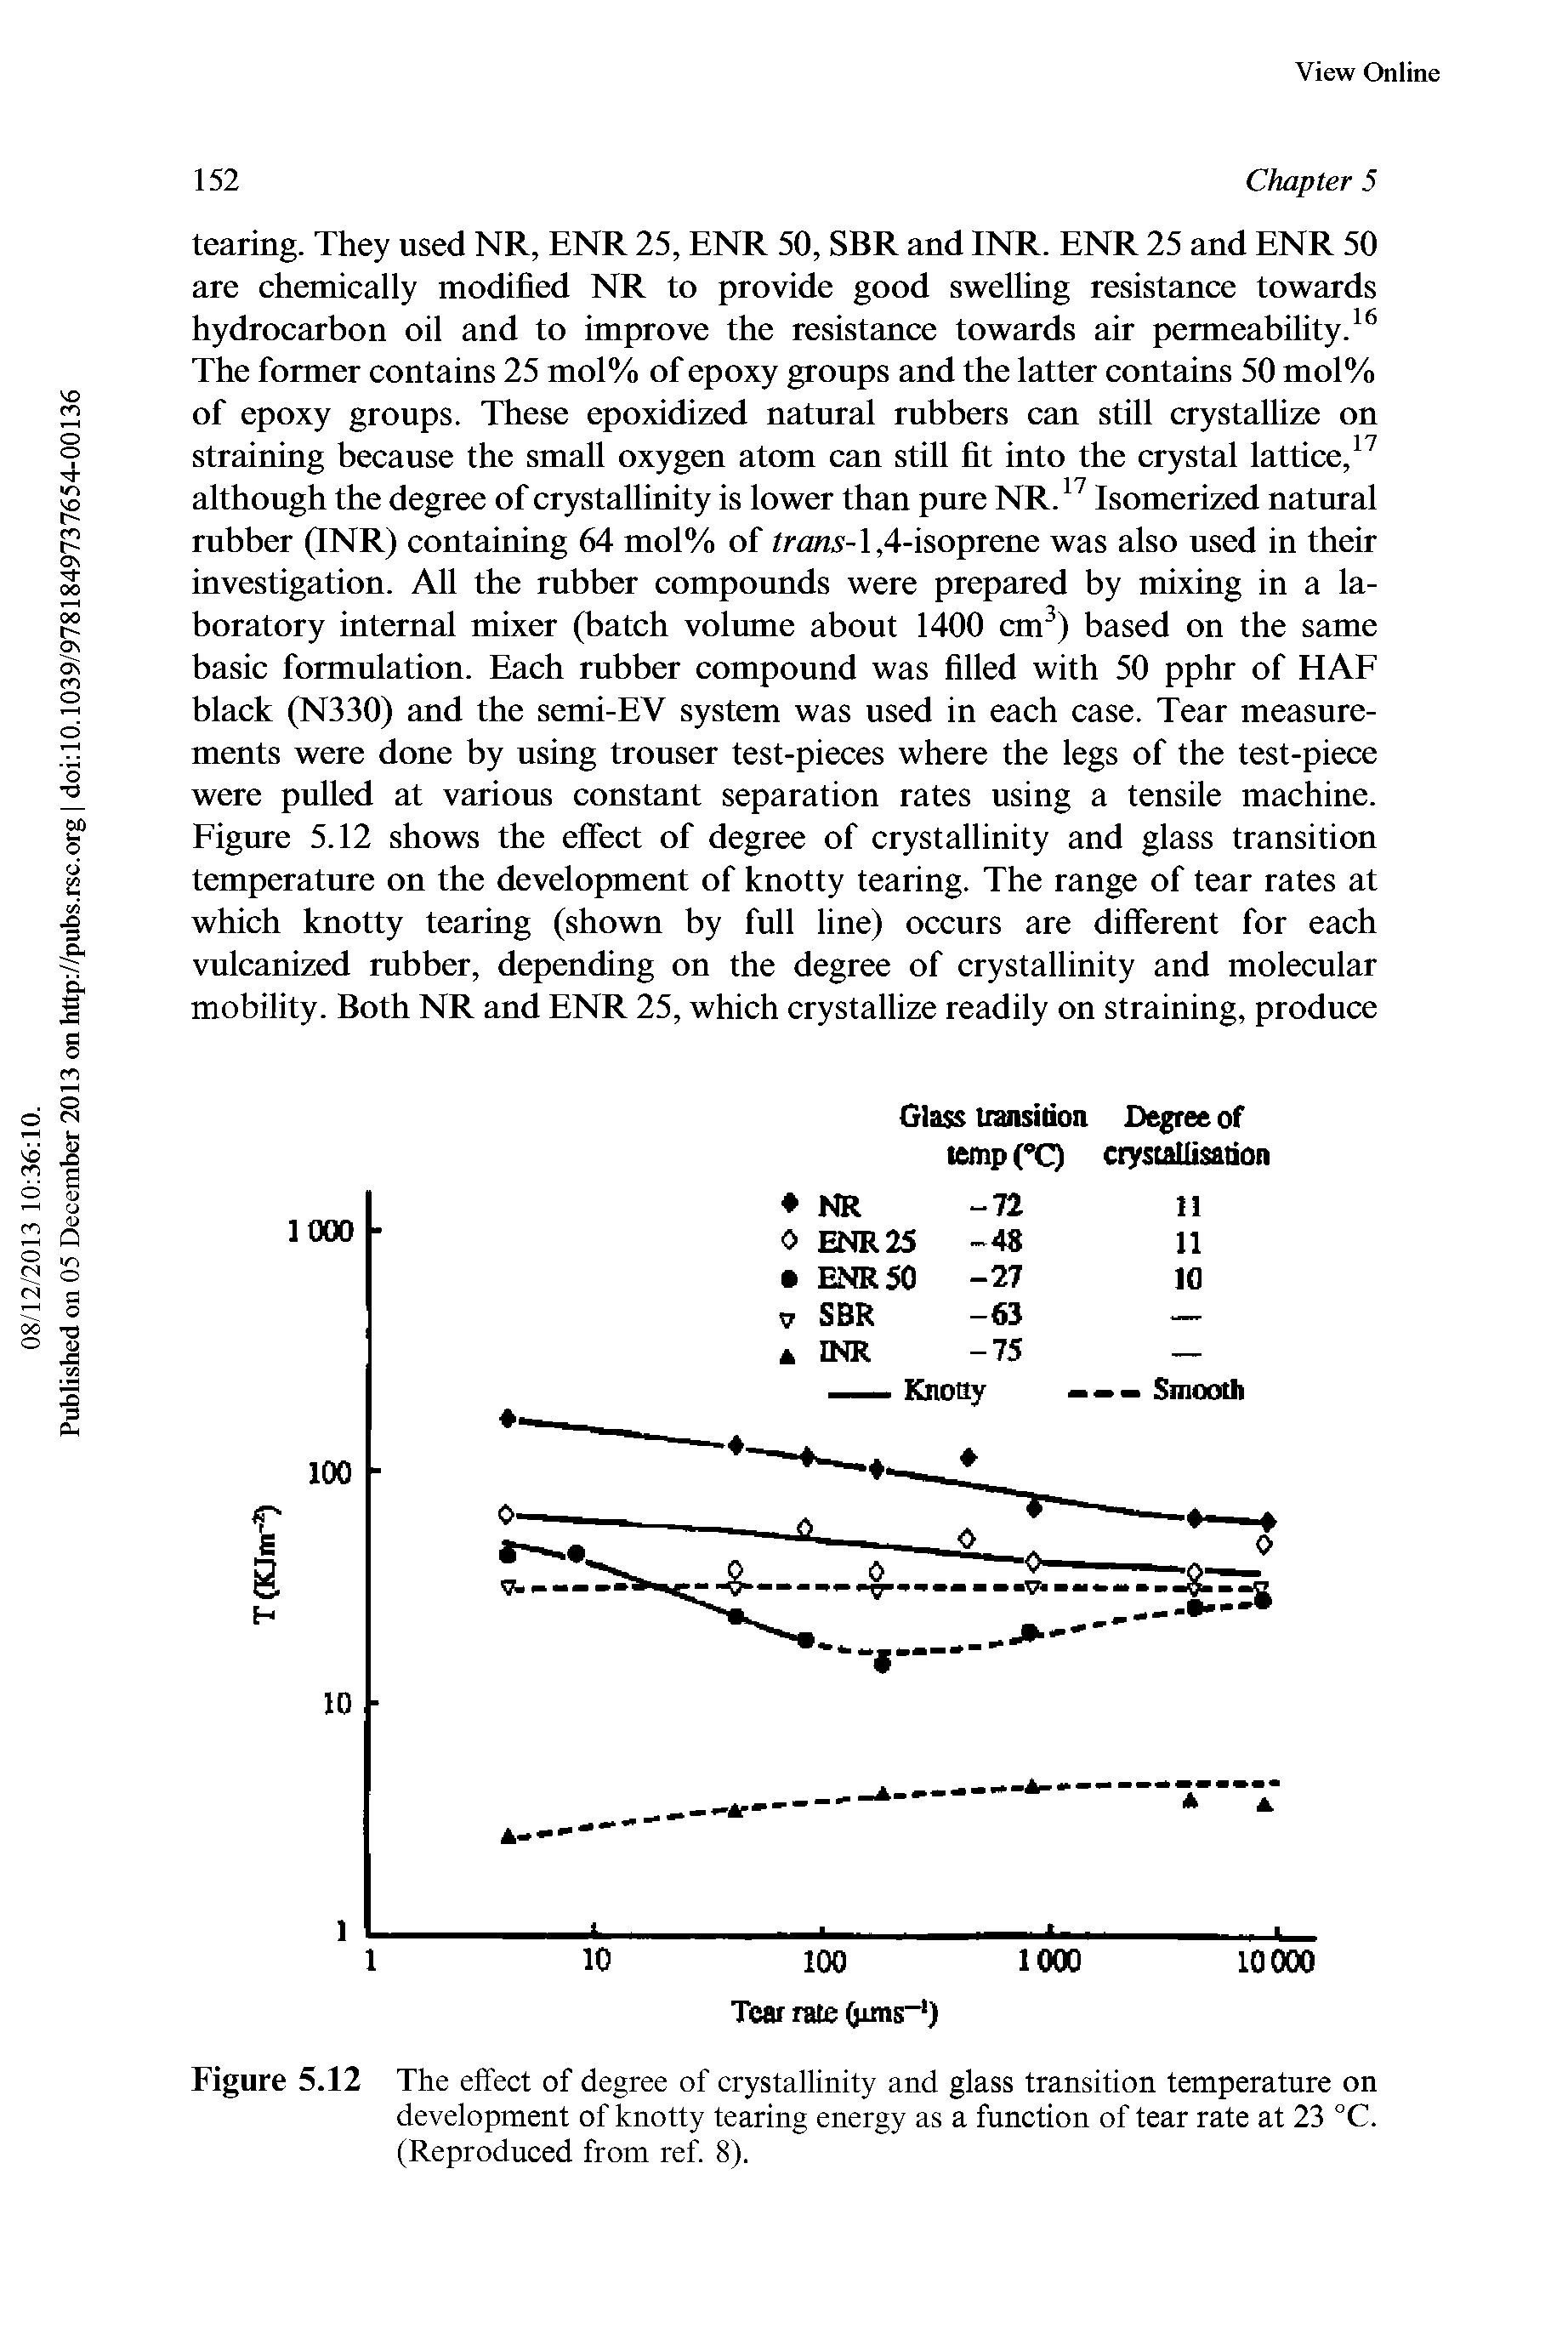 Figure 5.12 The effect of degree of crystallinity and glass transition temperature on development of knotty tearing energy as a function of tear rate at 23 °C. (Reproduced from ref. 8).